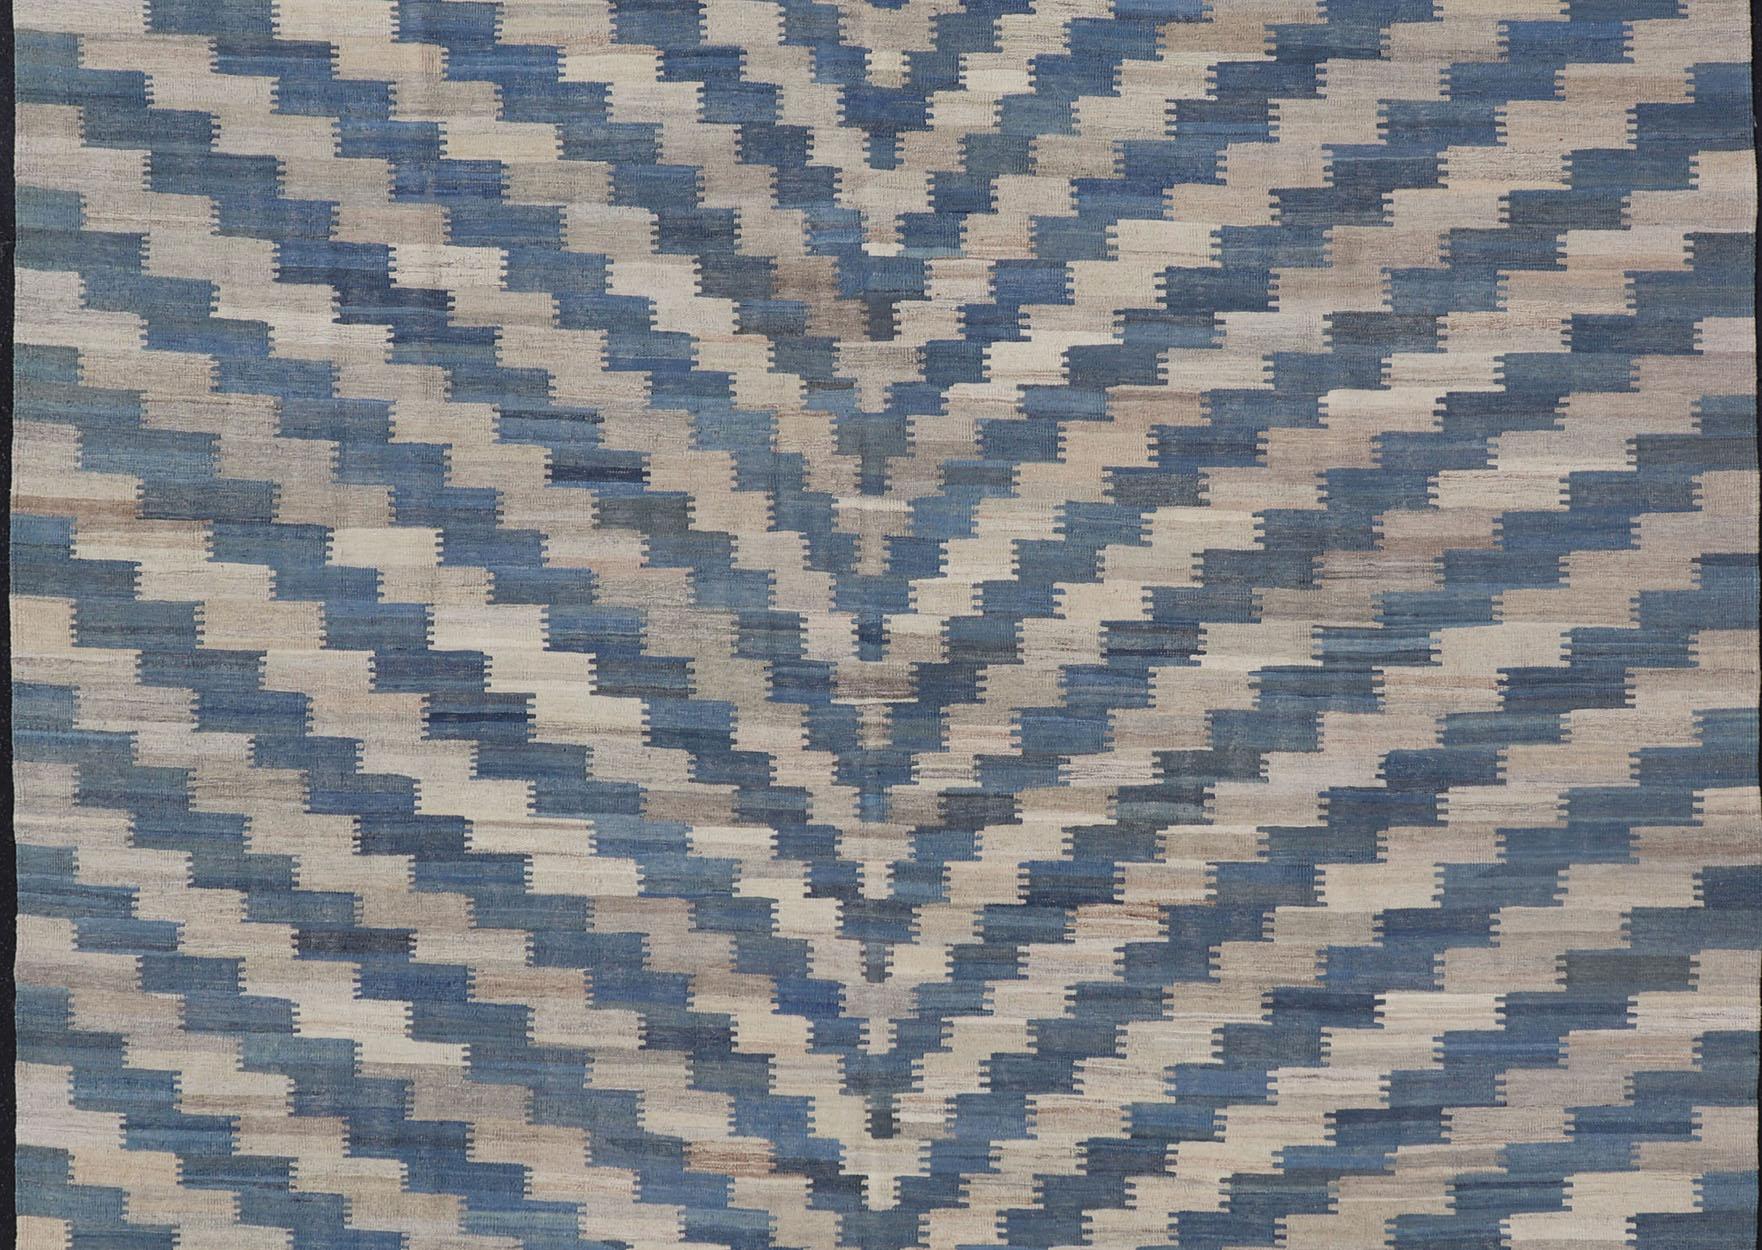 Afghan Flat-Weave Kilim Rug with a Modern Design in Blue, and Creams For Sale